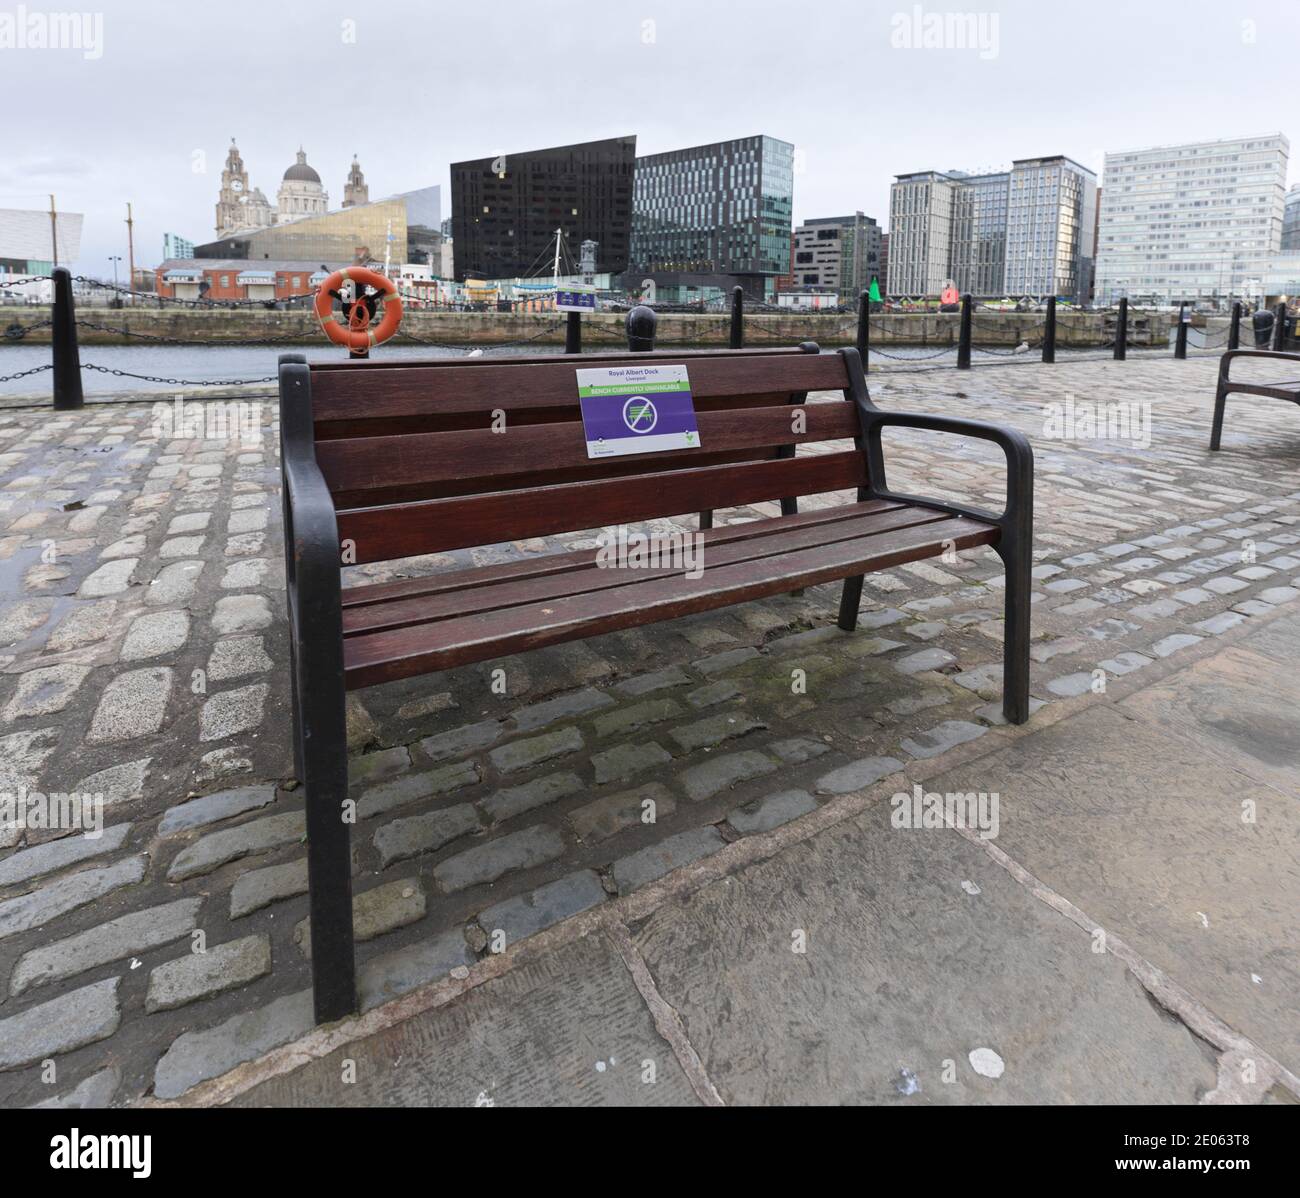 A bench in the Royal Albert Dock area of Liverpool with a sign on saying that it is currently unavailable but doesn't explain why Stock Photo